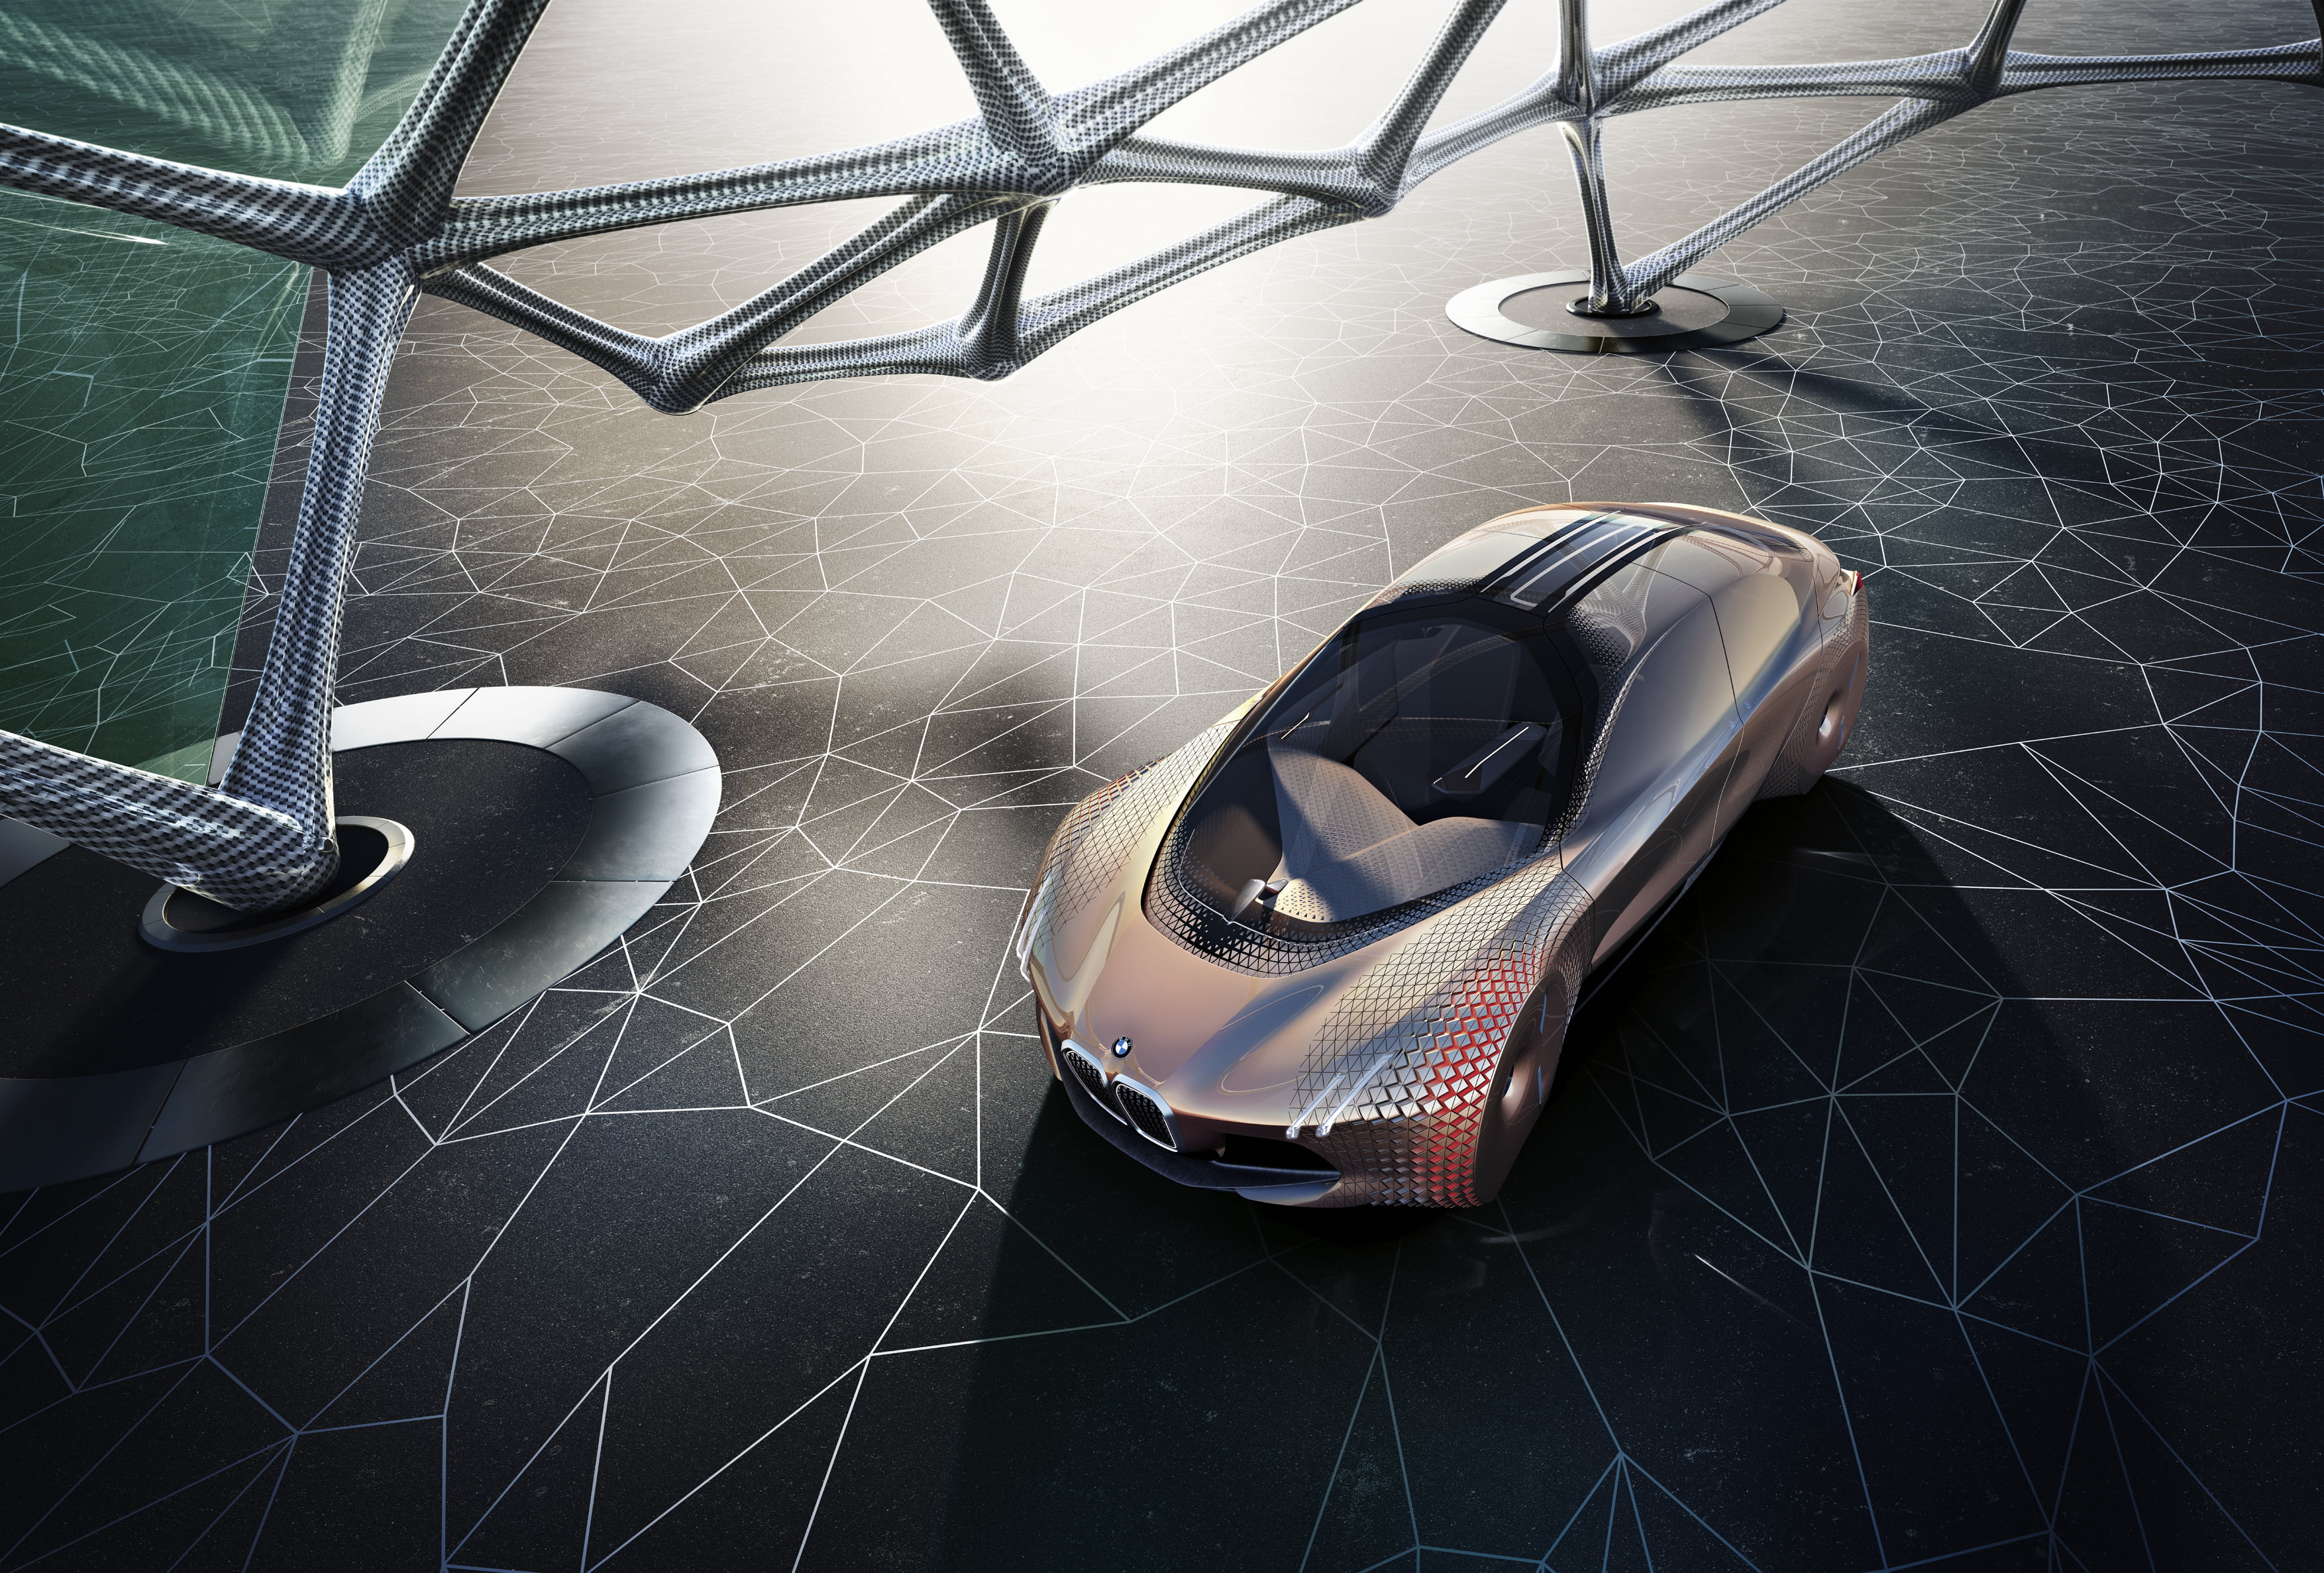 BMW Vision Next 100, car, concept cars, futuristic, abstract